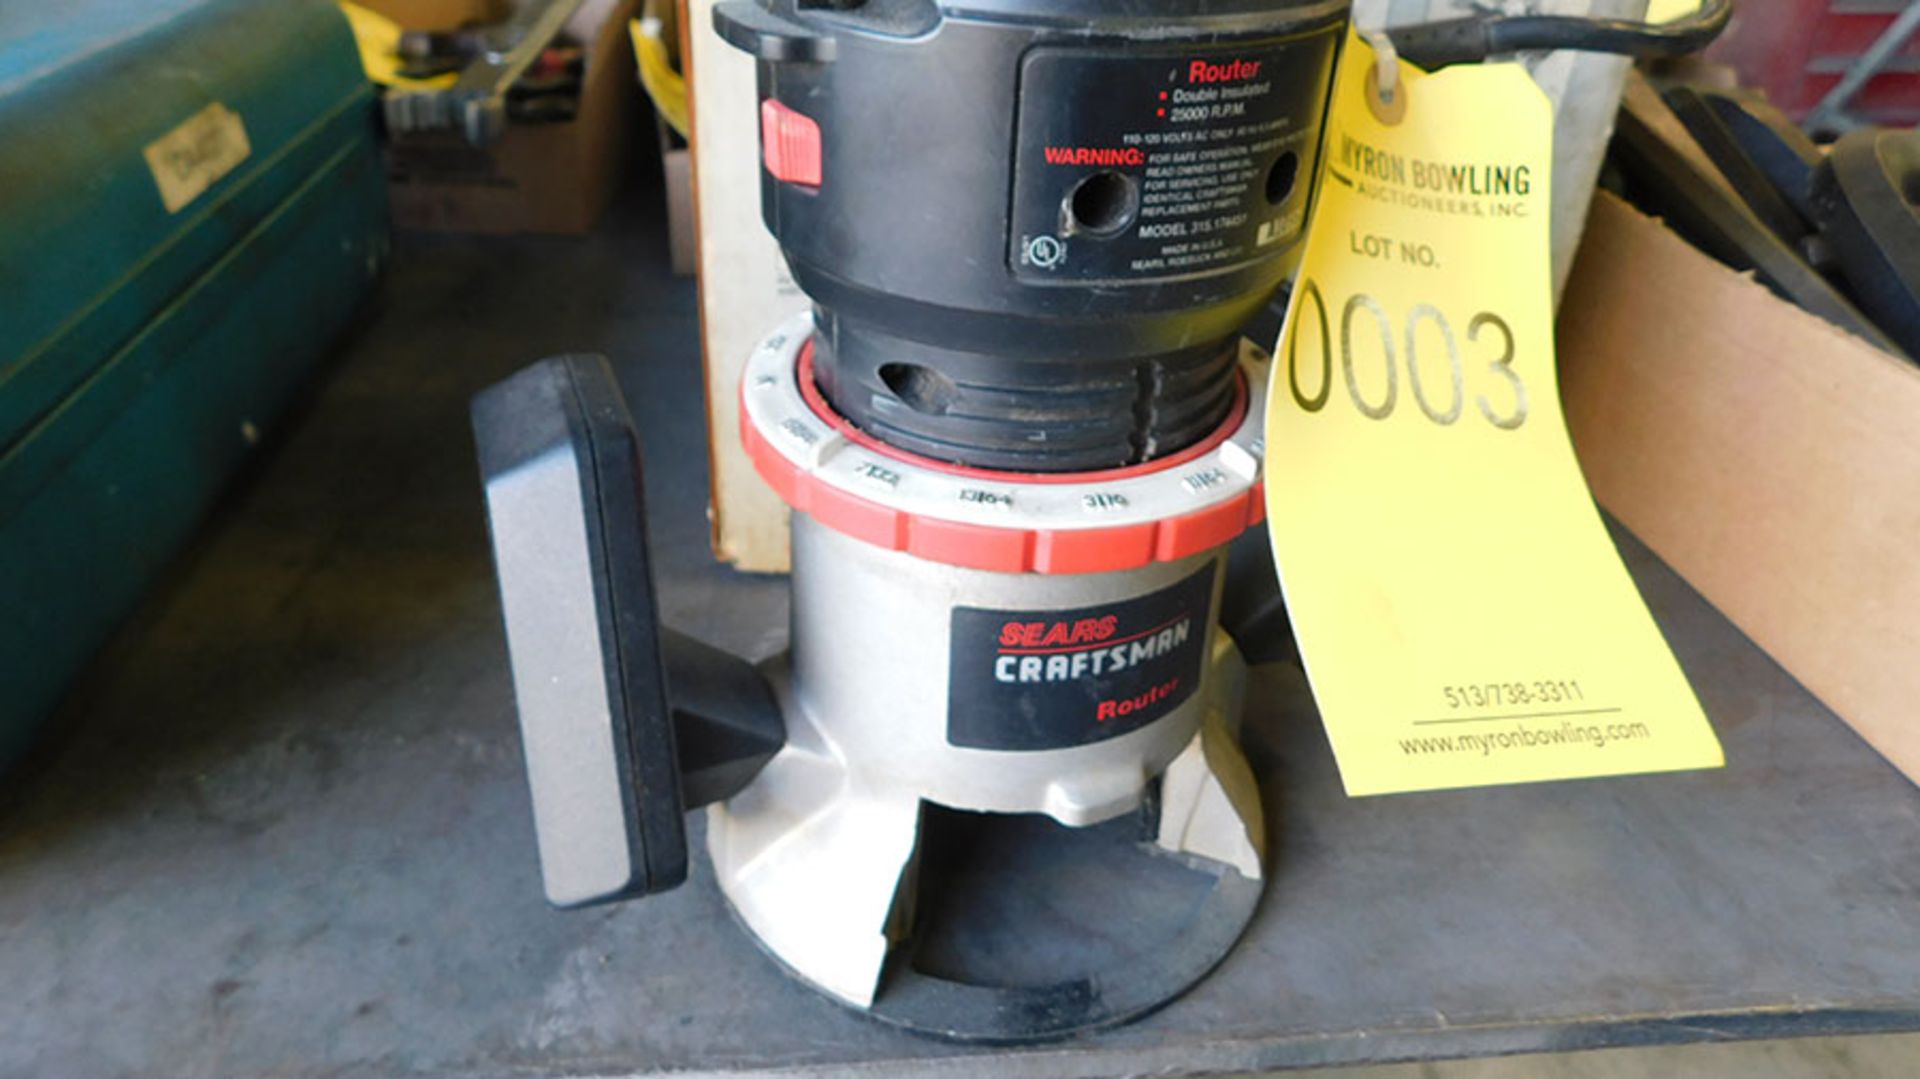 CRAFTSMAN ELECTRIC ROUTER, MODEL 315.174451, S/N A1096, 1-HP, 25,000 RPM